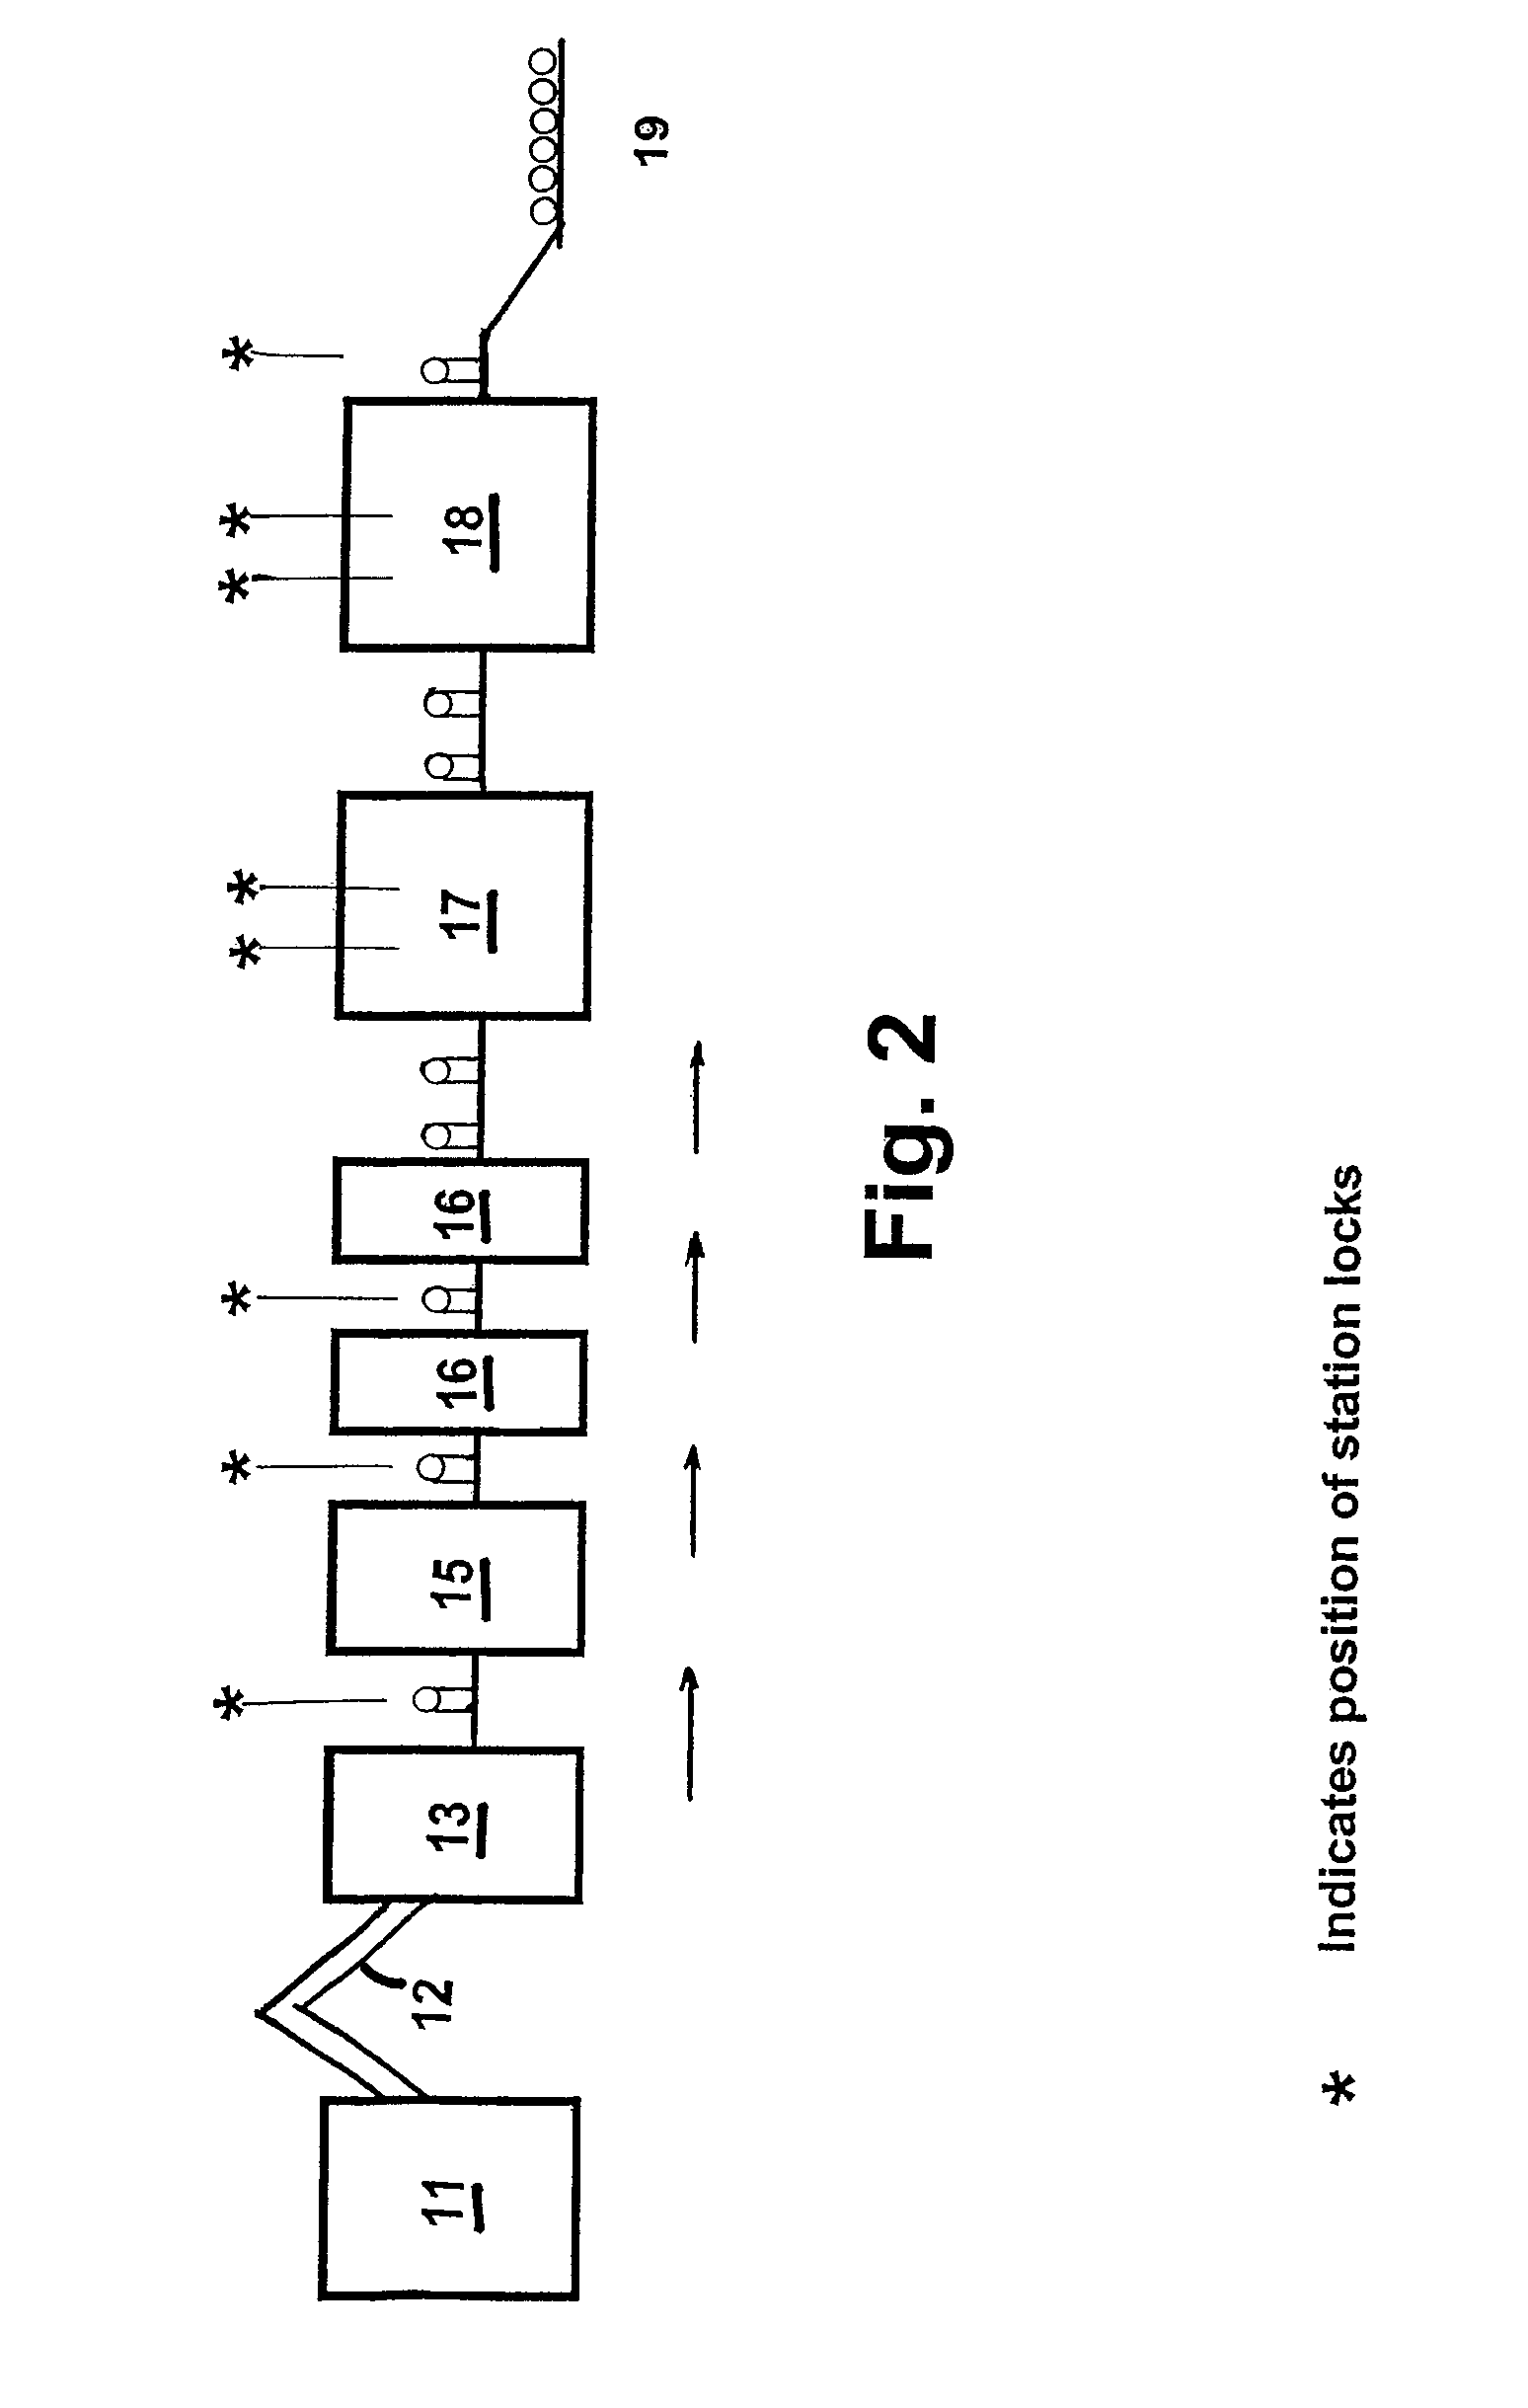 Method and apparatus for automatic indexing of a golf ball